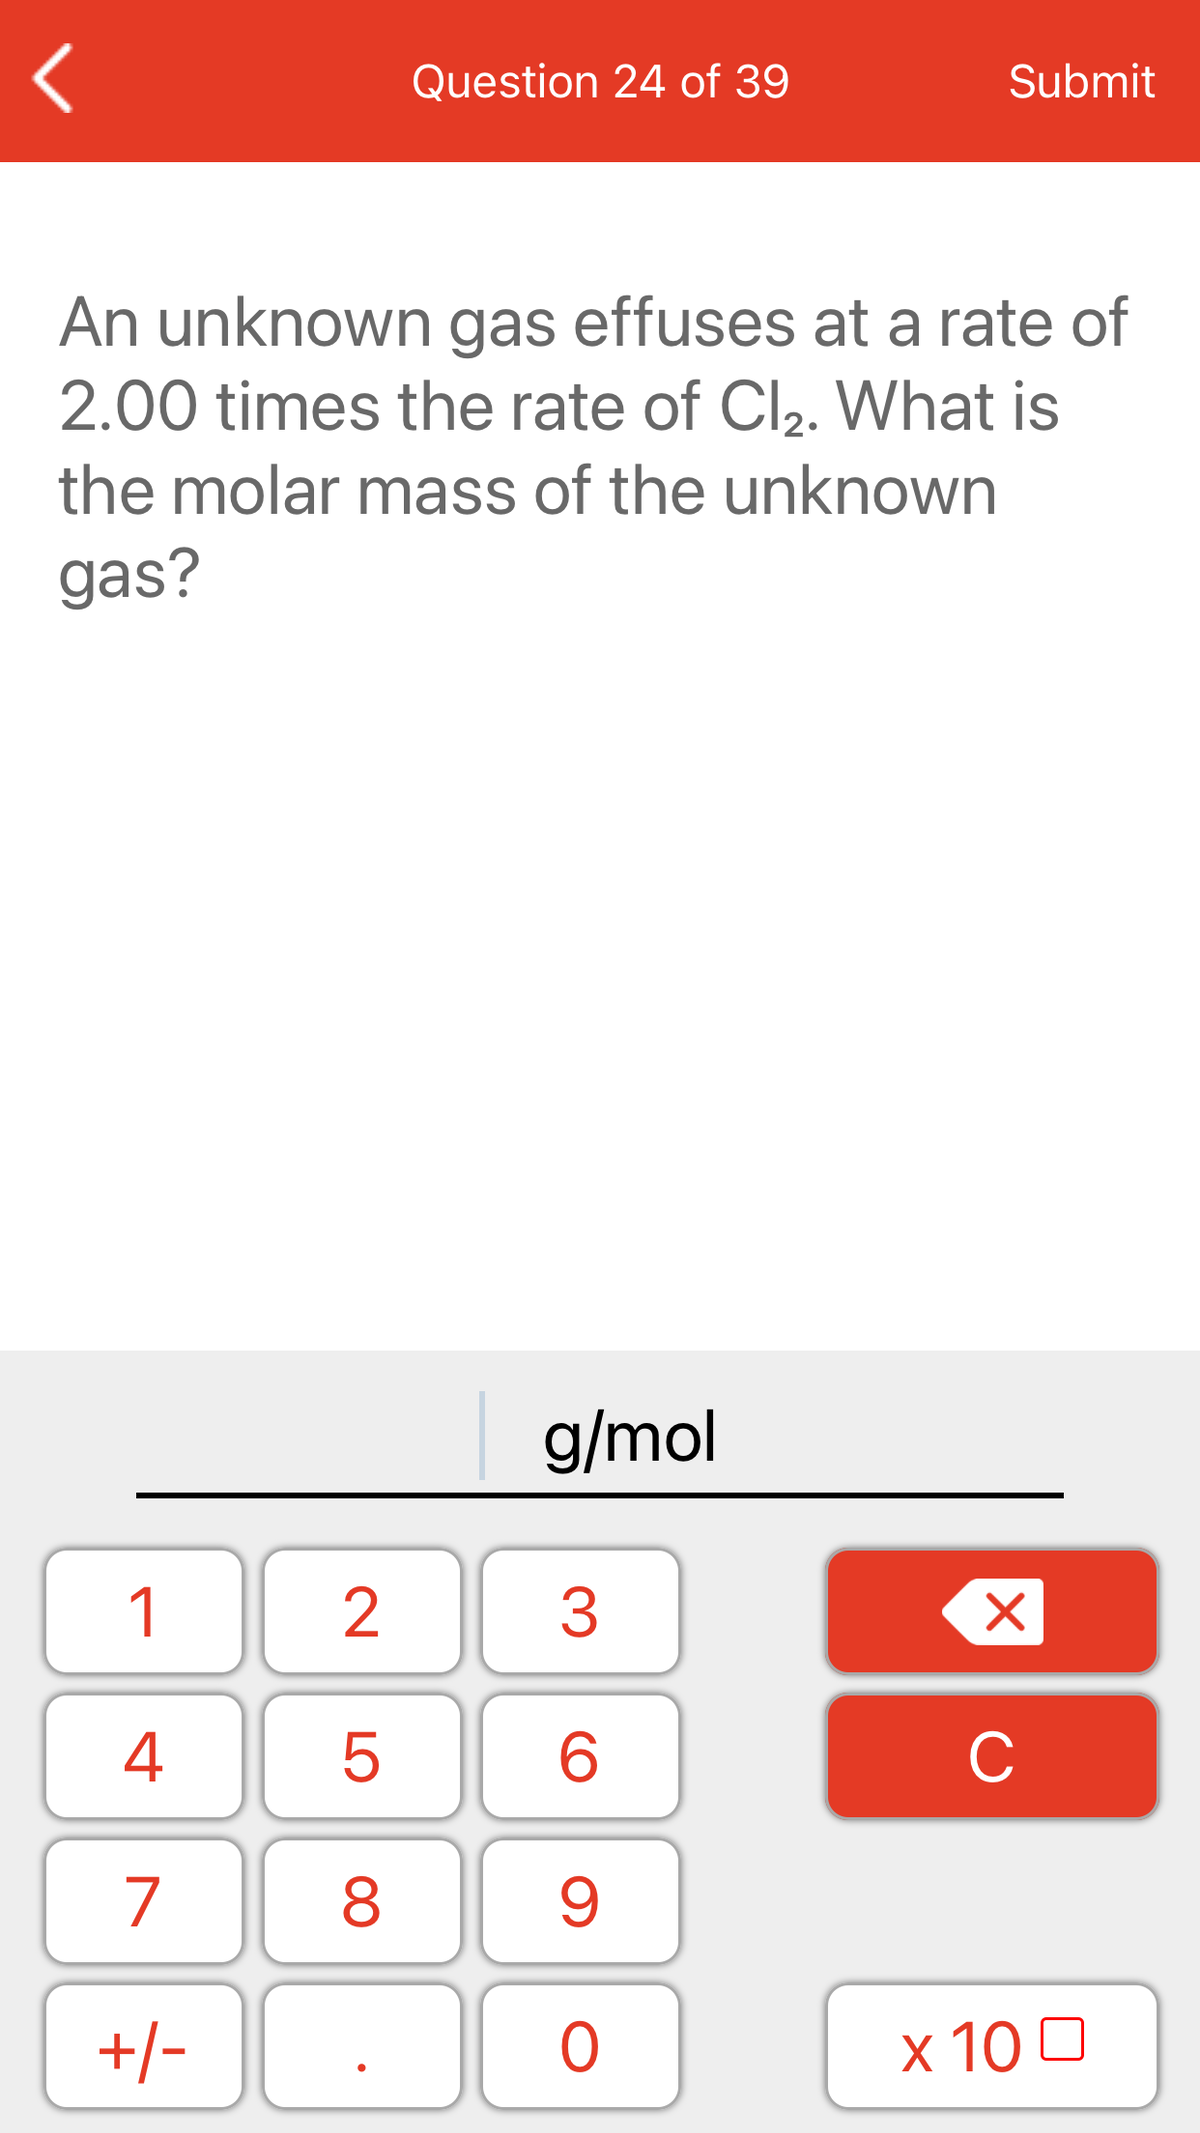 Question 24 of 39
Submit
An unknown gas effuses at a rate of
2.00 times the rate of Cl2. What is
the molar mass of the unknown
gas?
g/mol
1
2
3
4
C
7
+/-
x 10 0
LO
00
